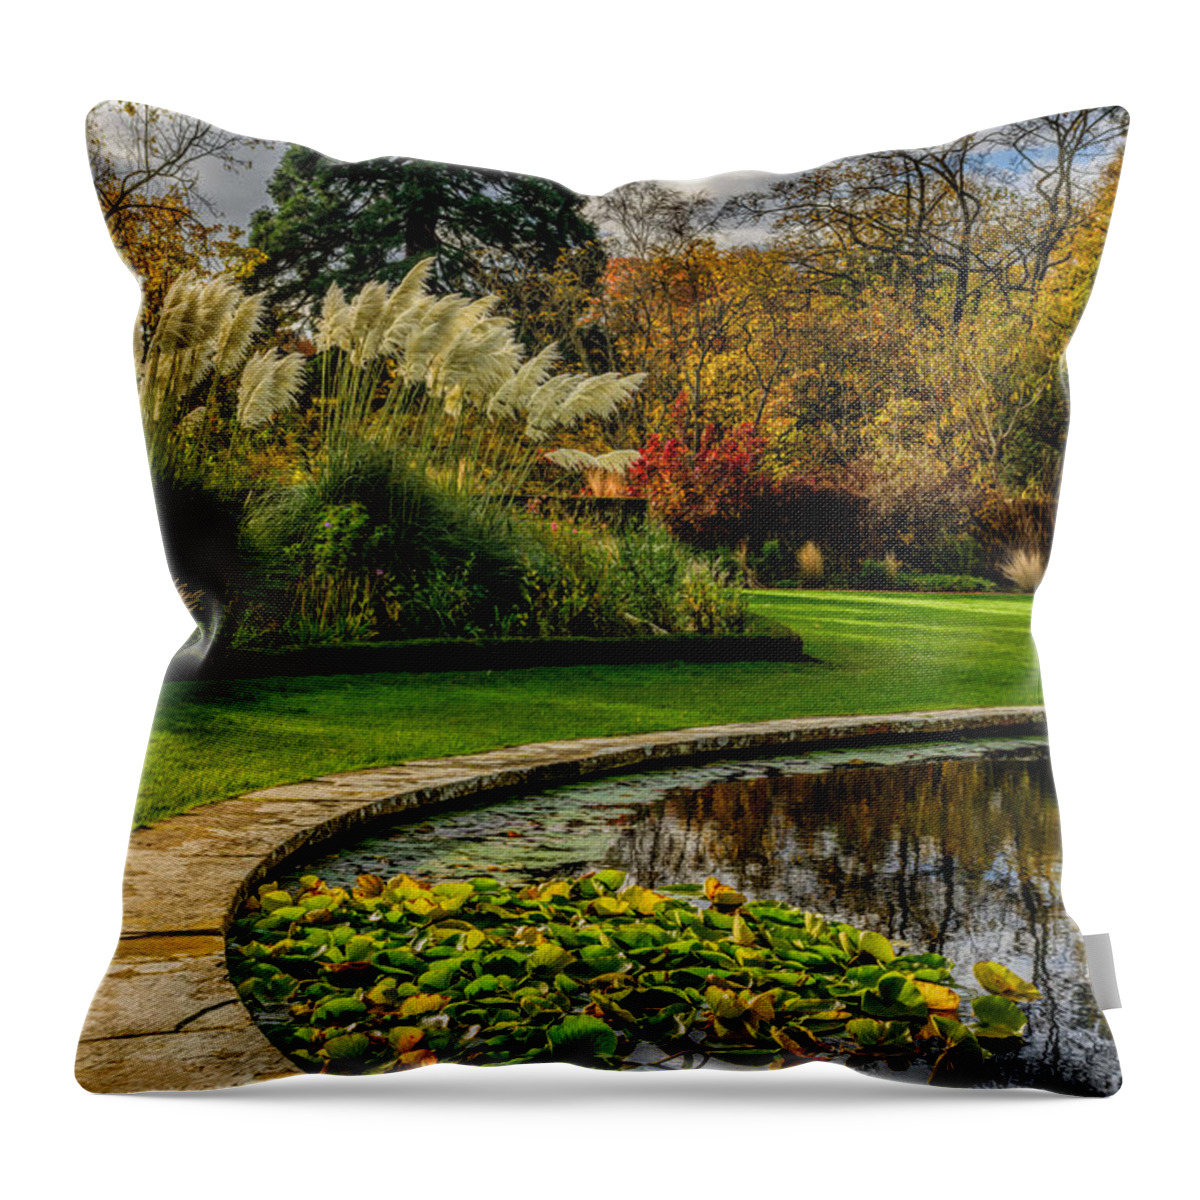 Pond Throw Pillow featuring the photograph Autumn Garden by Adrian Evans